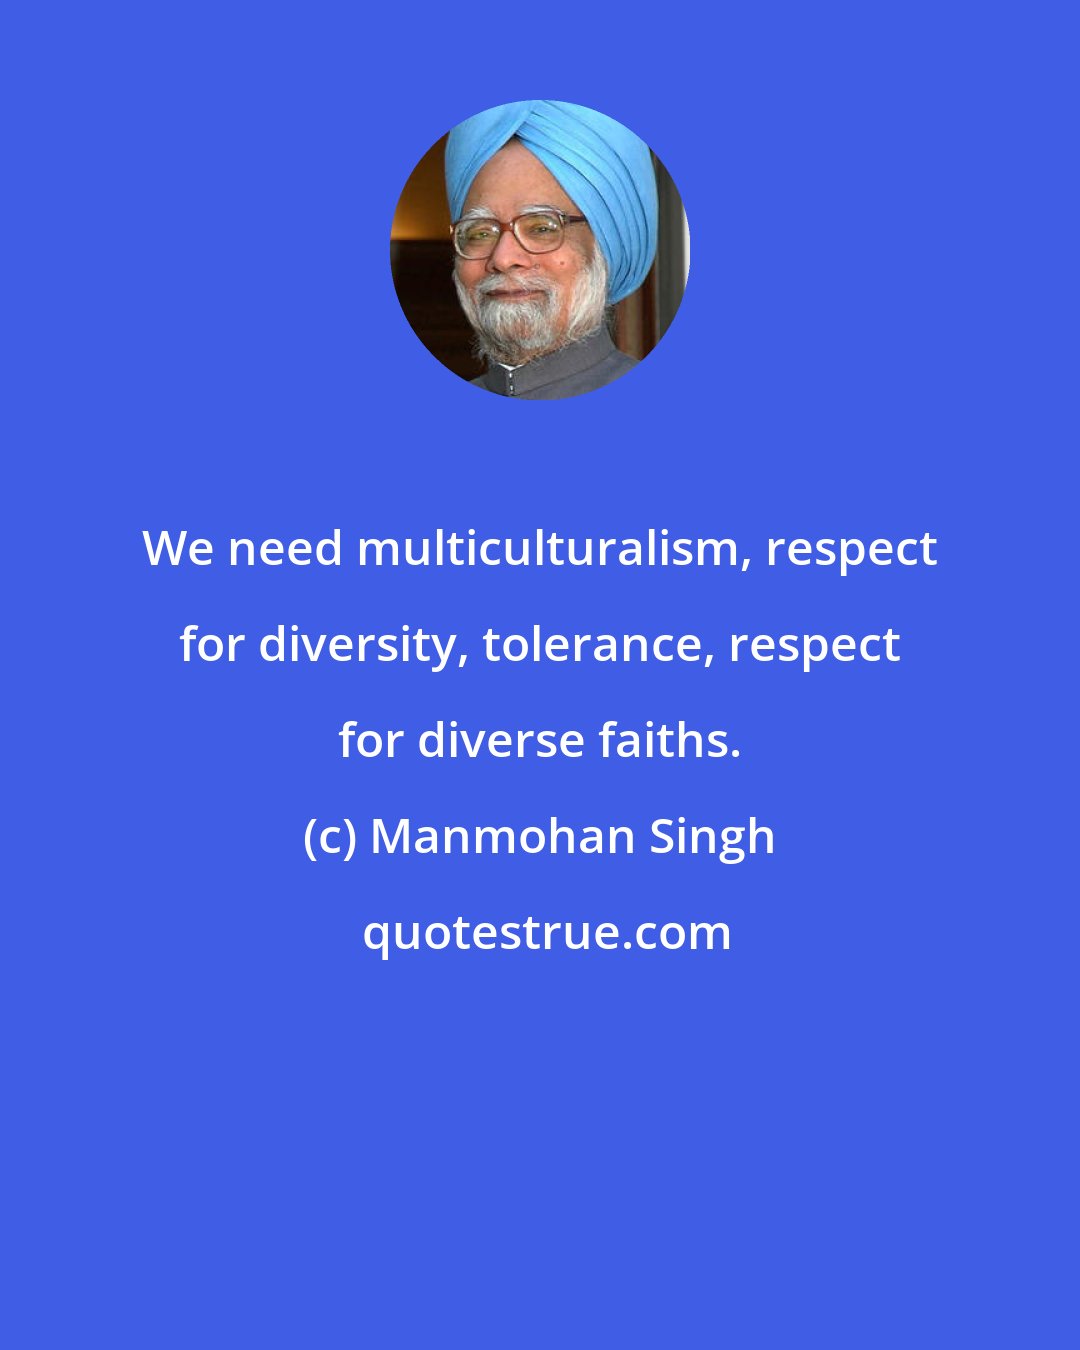 Manmohan Singh: We need multiculturalism, respect for diversity, tolerance, respect for diverse faiths.